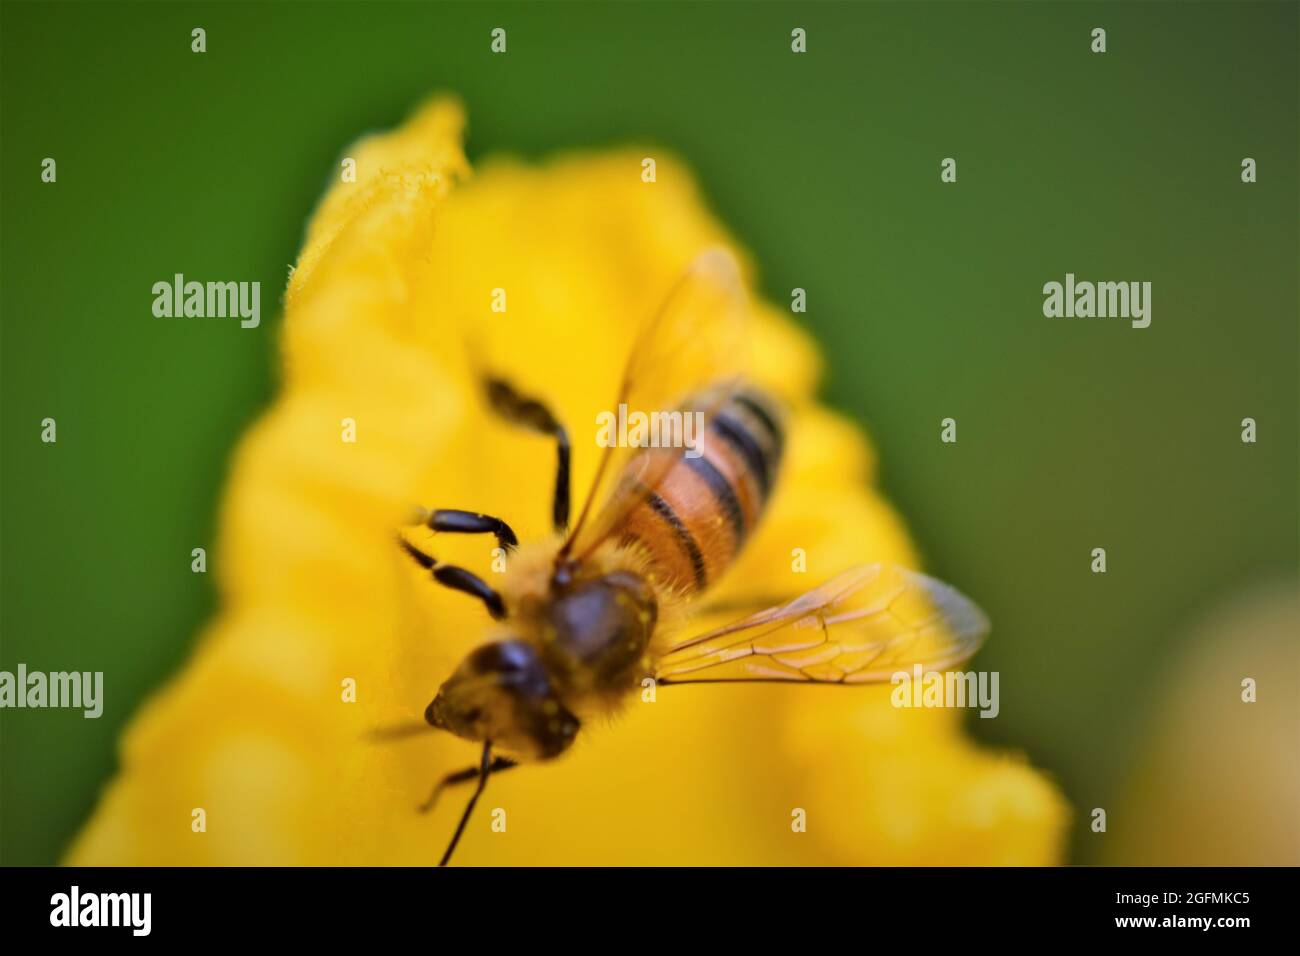 Honey bee on a yellow leave of a pumkin blossom against a green blurred background Stock Photo